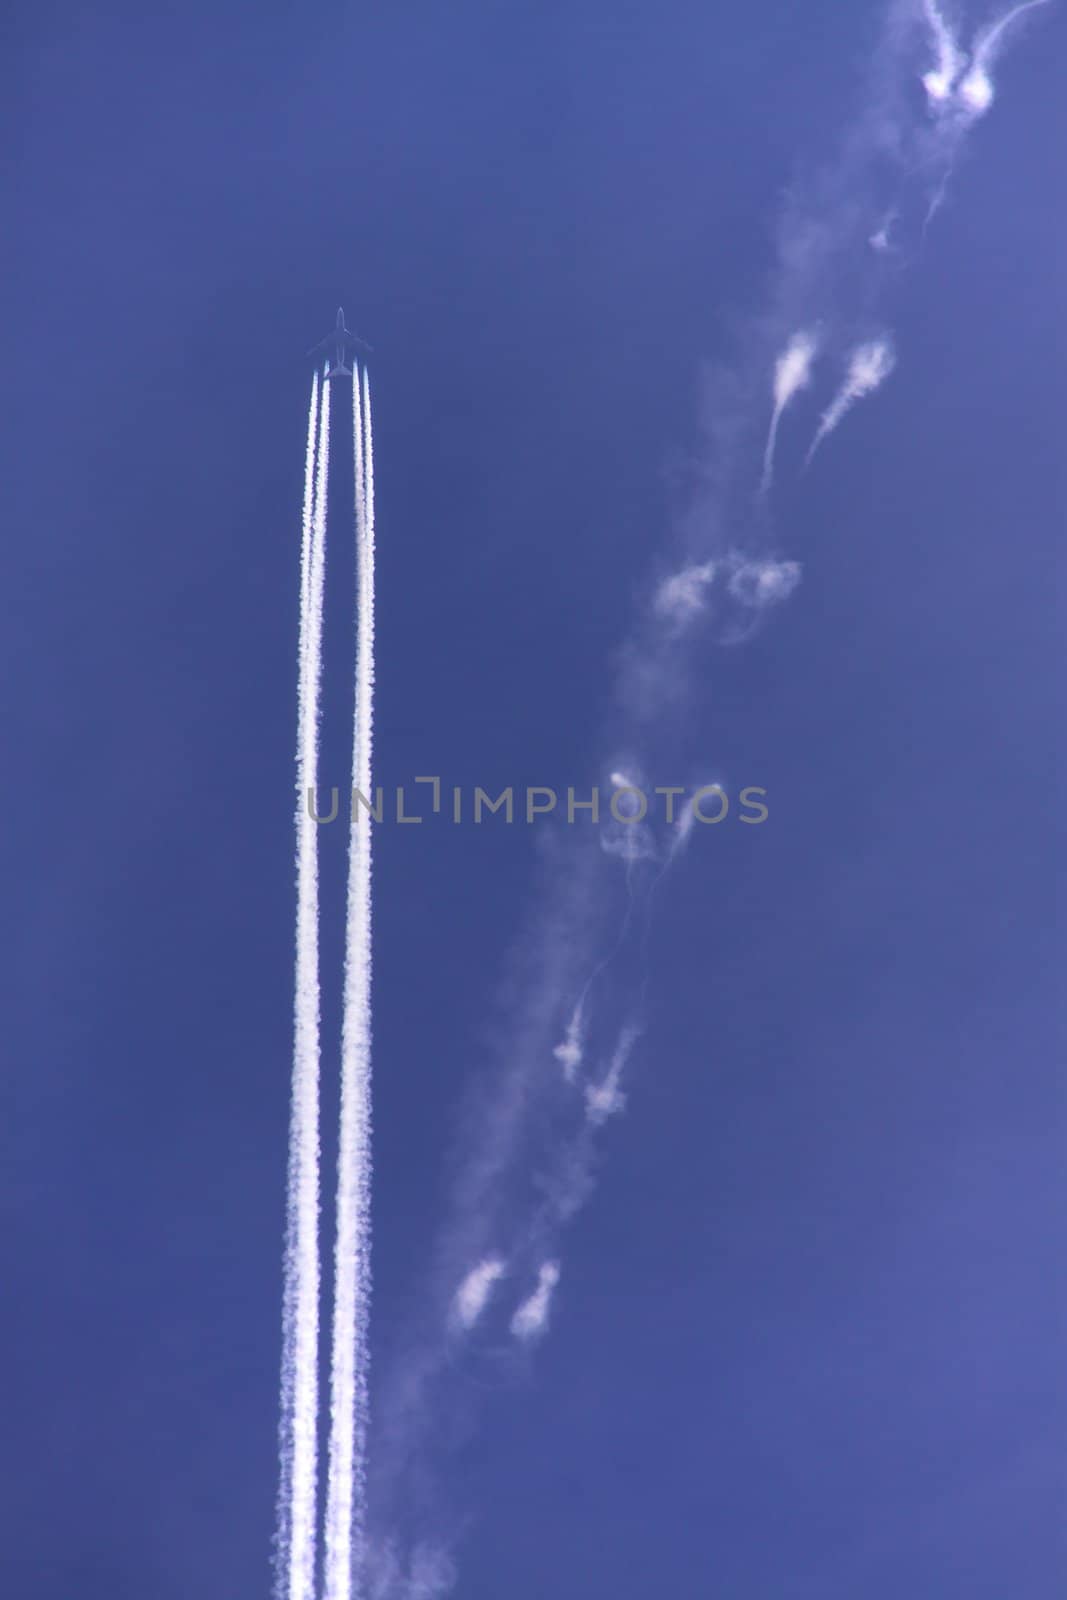 Condensation trail from a jet airplane with four engines